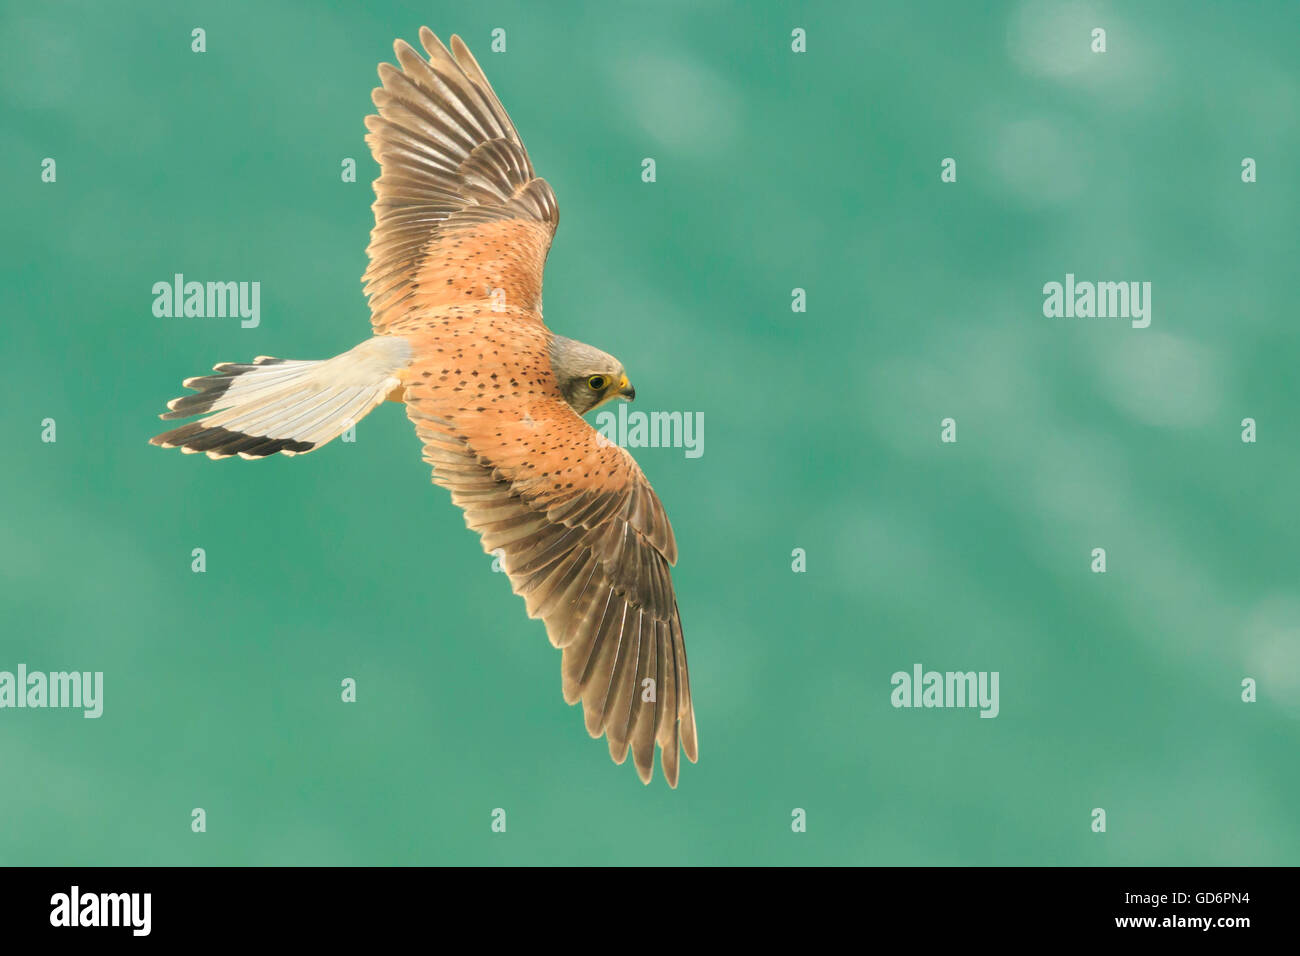 male Common kestrel Falco tinnunculus flying over the green sea with wings open seen from above the bird of prey Stock Photo